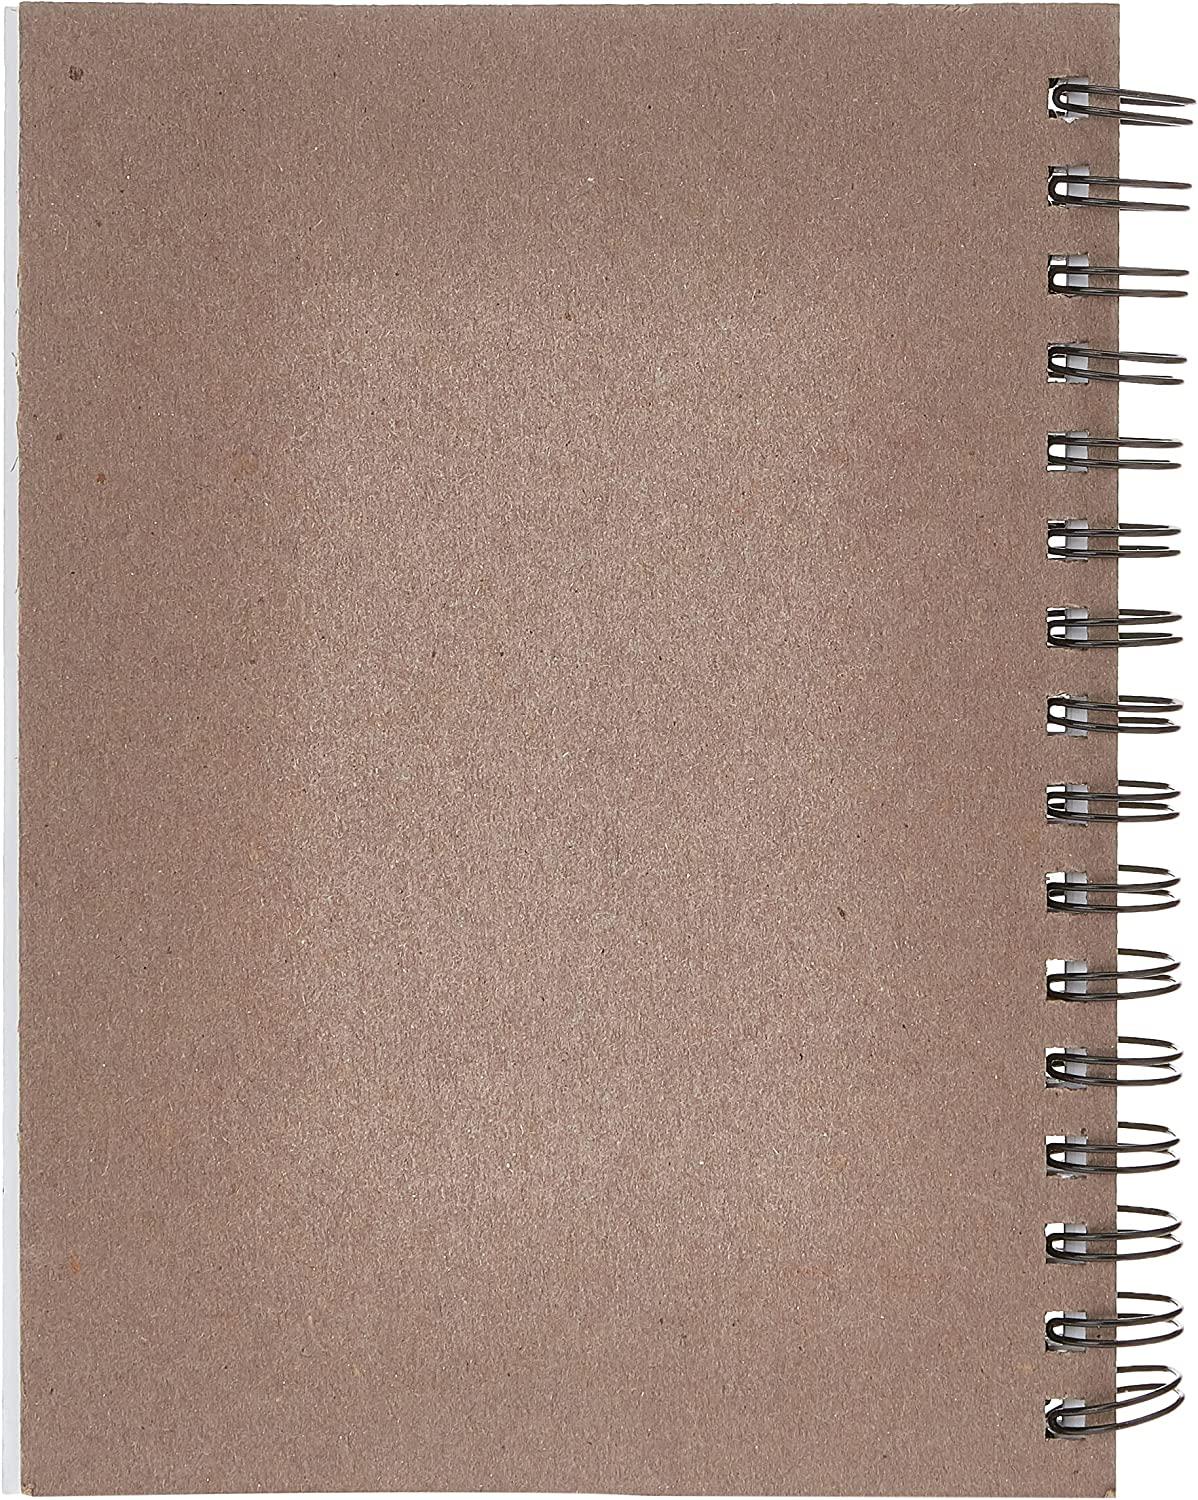  Canson XL Series Mixed Media Pad, Side Wire, 5.5x8.5